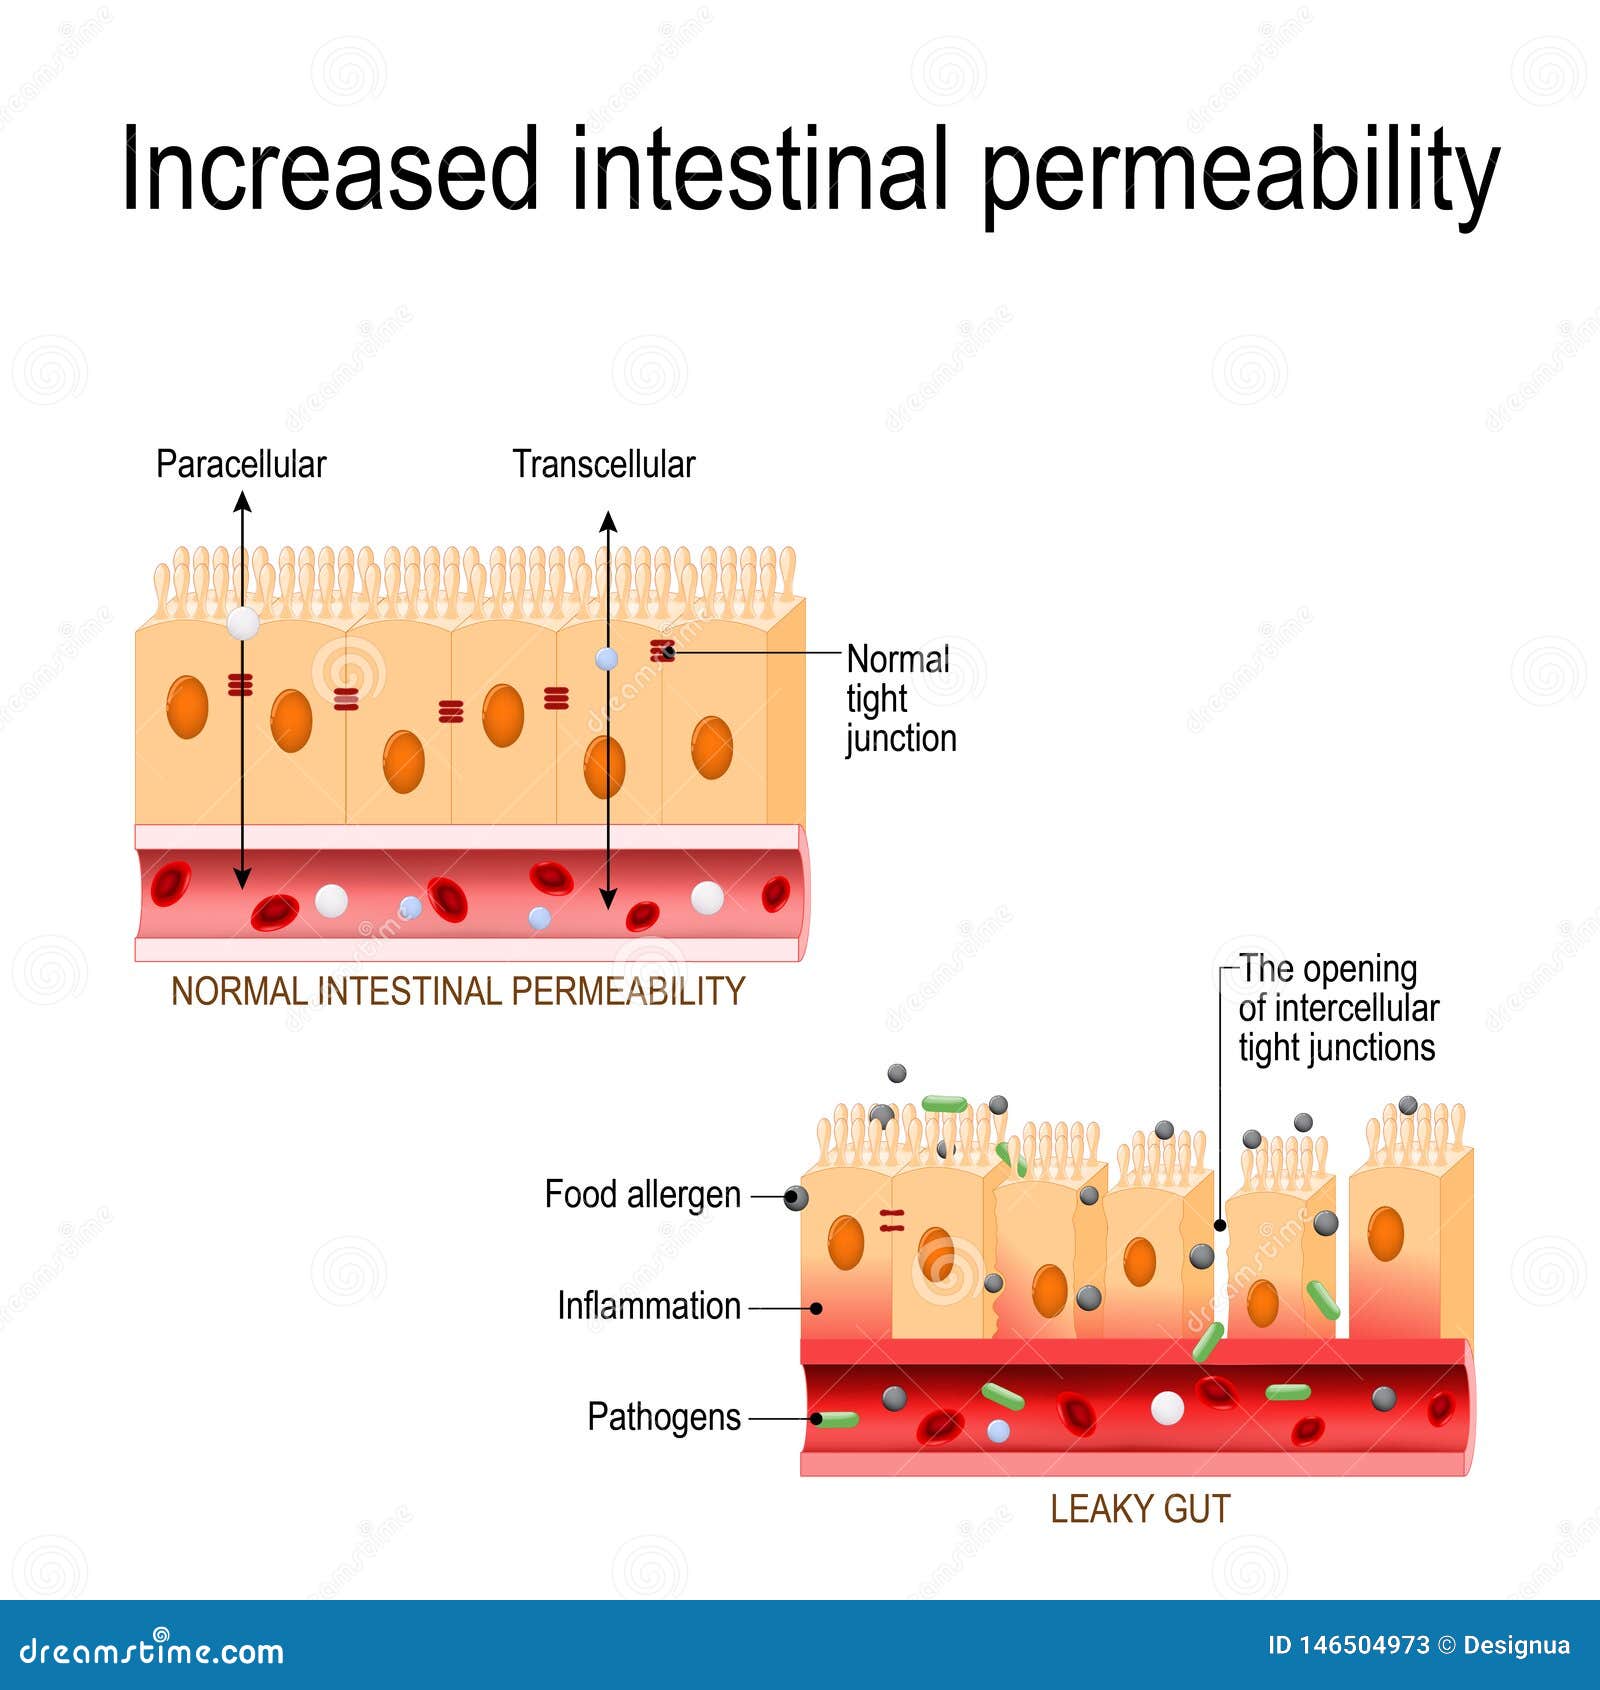 leaky gut. the opening of intercellular tight junctions increased intestinal permeability